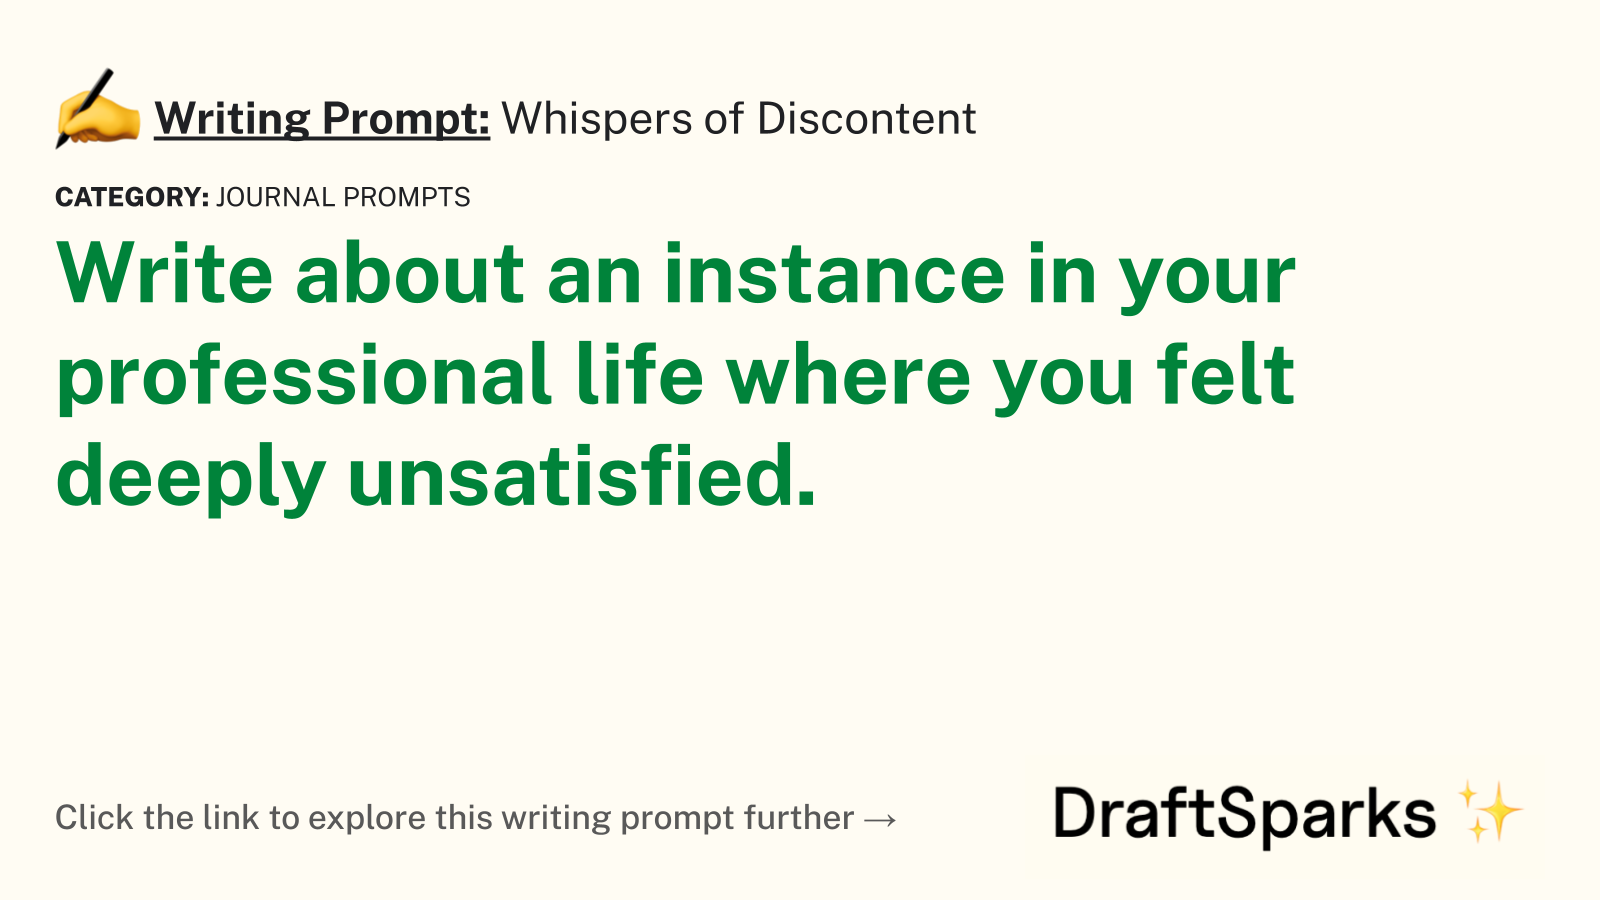 Whispers of Discontent